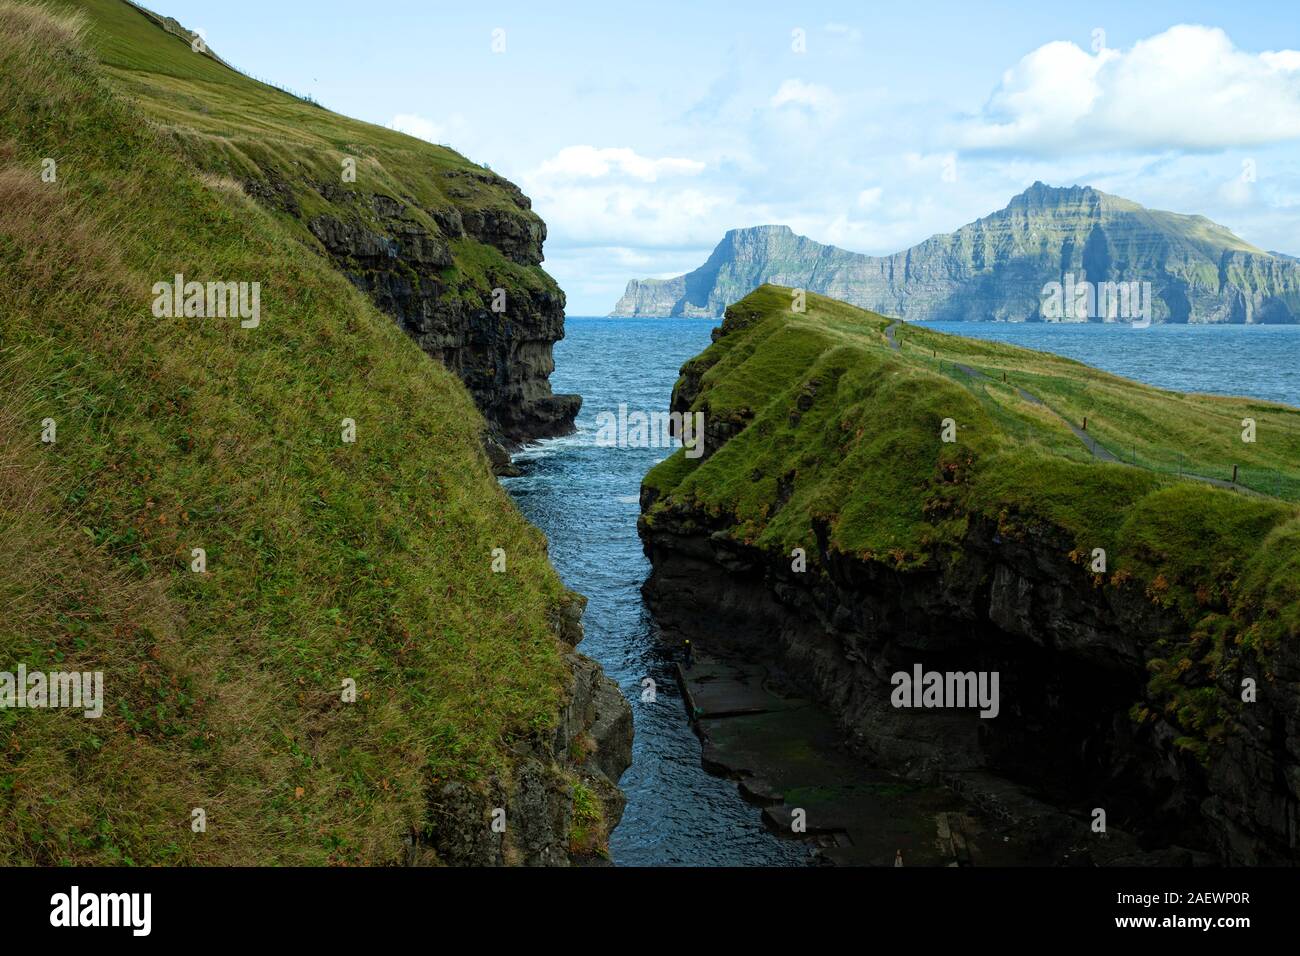 Direct view into the gorge / natural harbour of Gjogv with dramatic cloudy sky, lush green grass and turquoise water Stock Photo